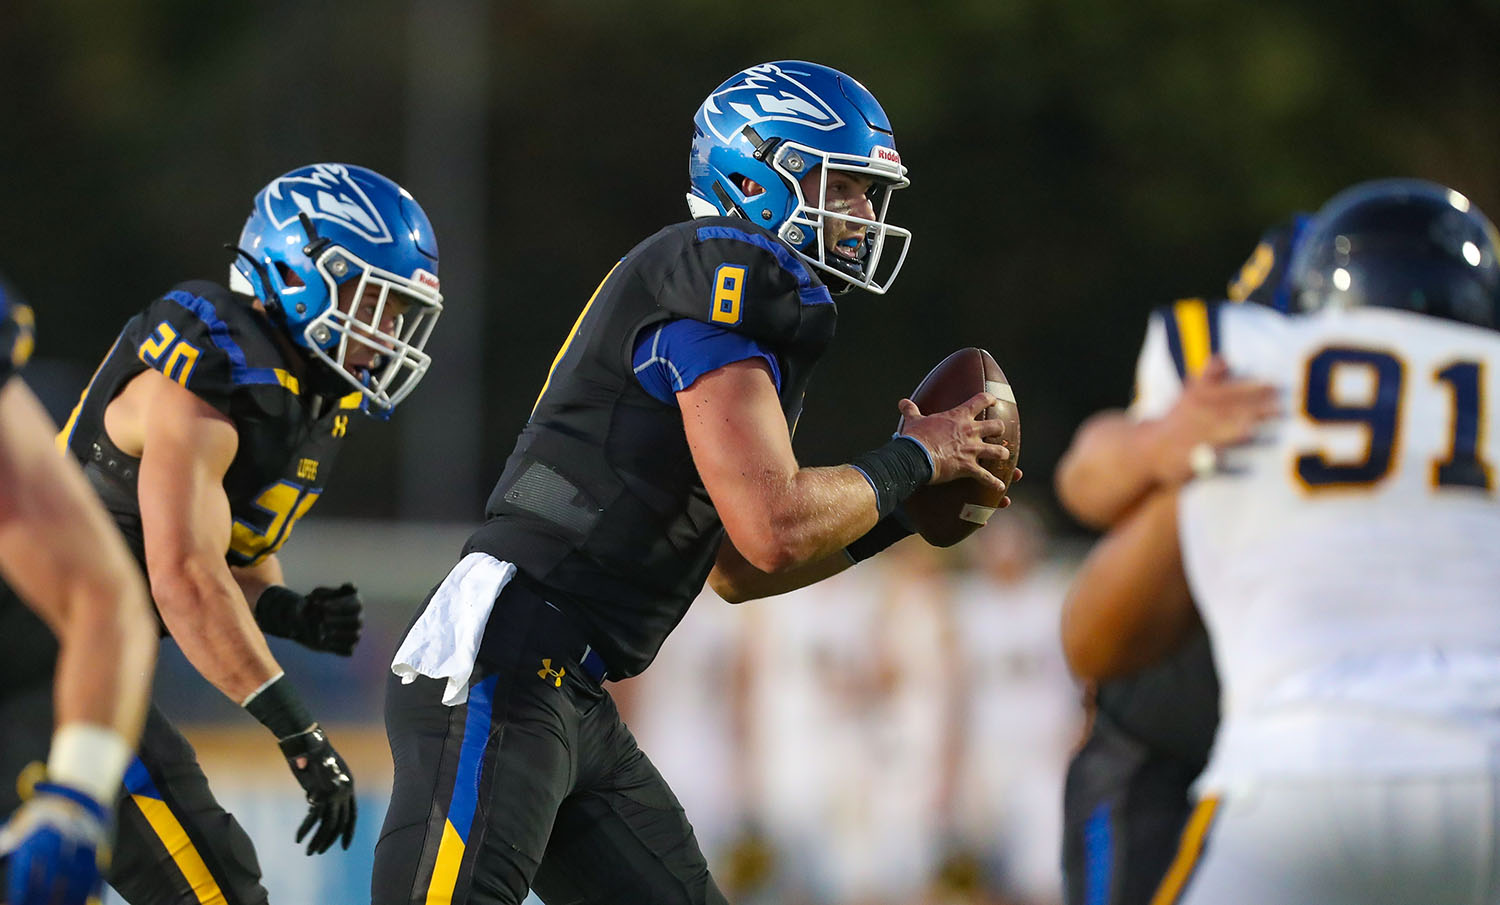 “I could name about 40 different dudes who were a big reason why I wanted to stay,” fifth-year senior Alex McGinnis said. “There’s definitely a correlation between our success and the type of people who are in the program.” (UNK Communications)